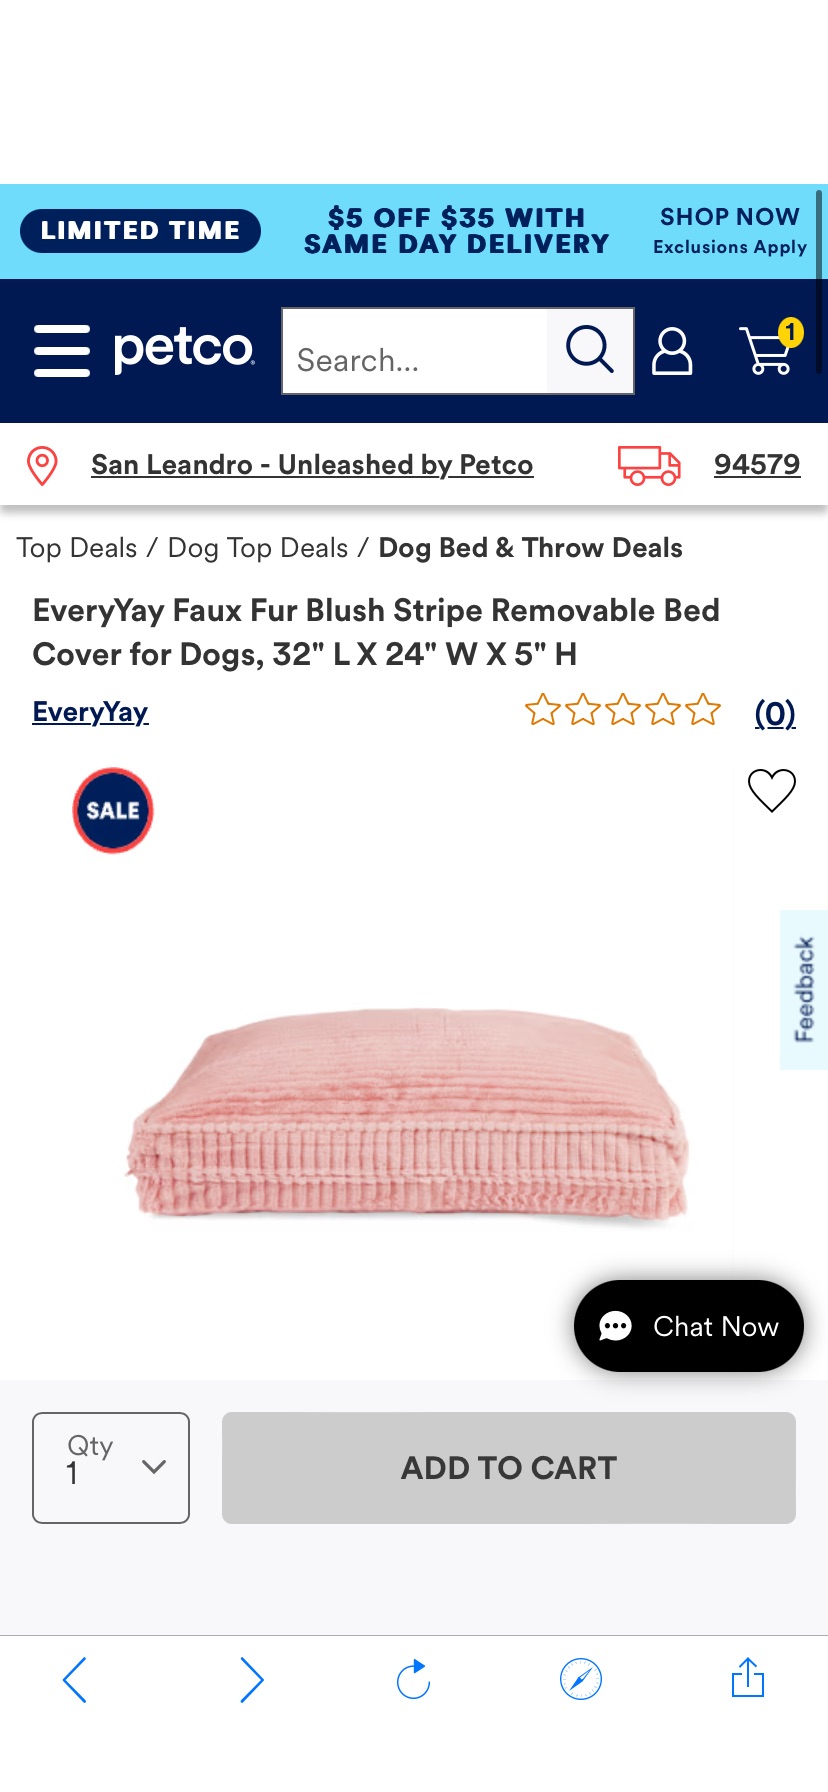 EveryYay Faux Fur Blush Stripe Removable Bed Cover for Dogs, 40" L X 30" W X 5" H | Petco